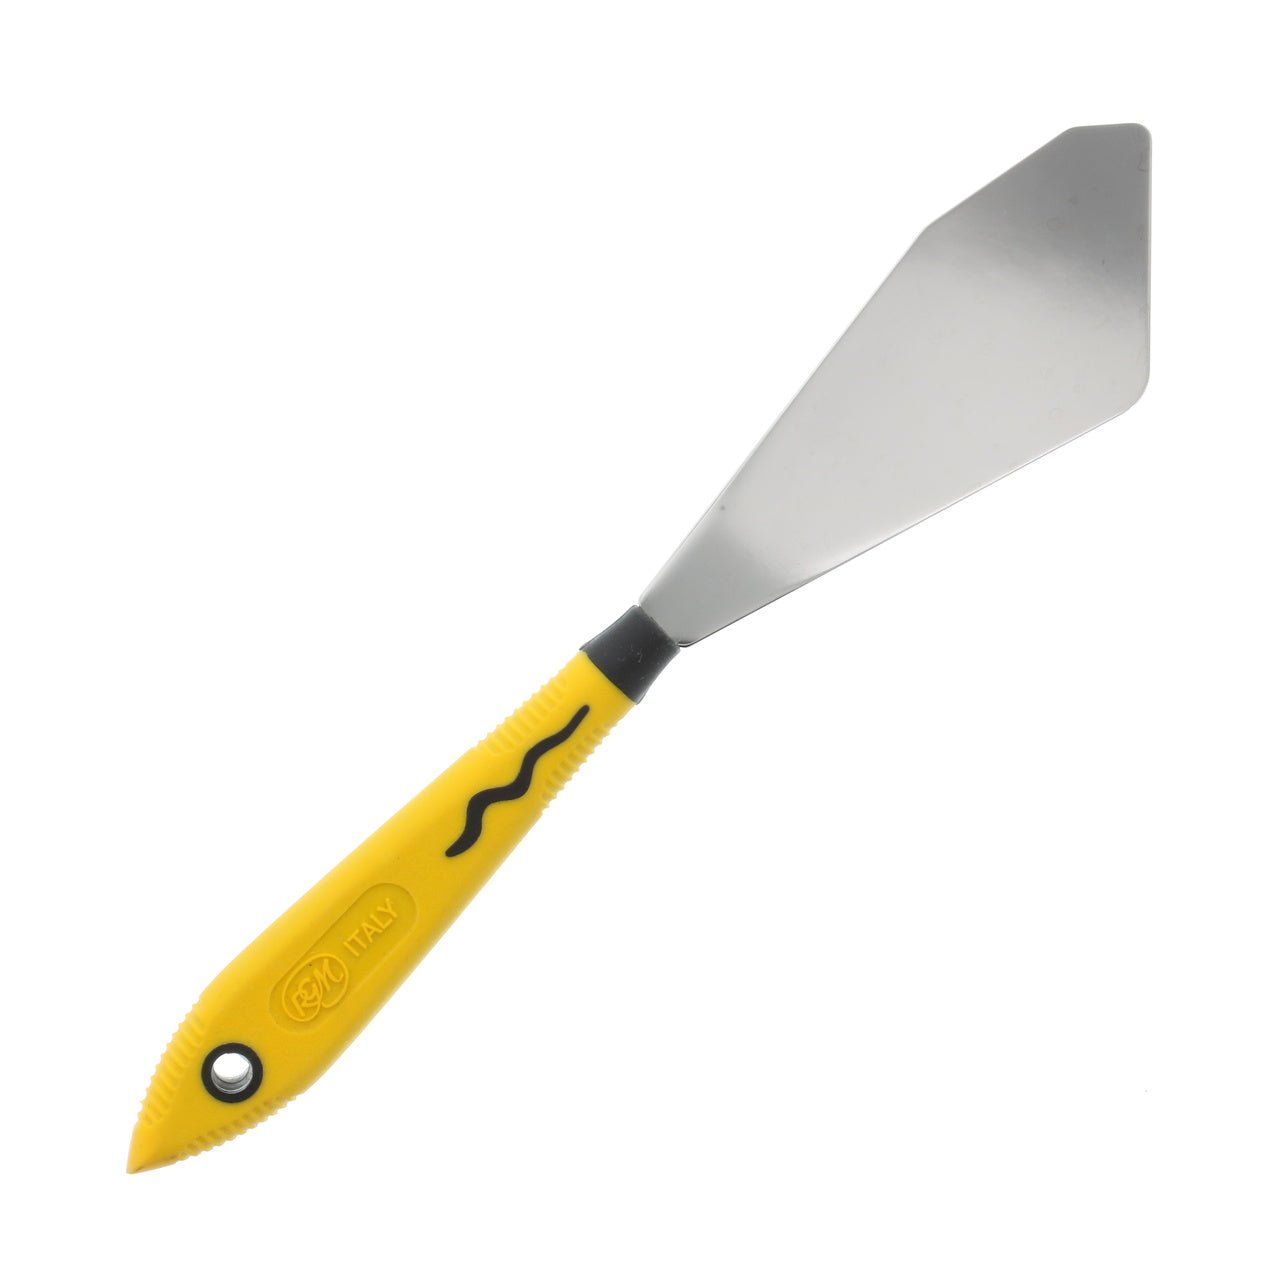 RGM Soft Grip Painting Knife #106 (Yellow Handle)